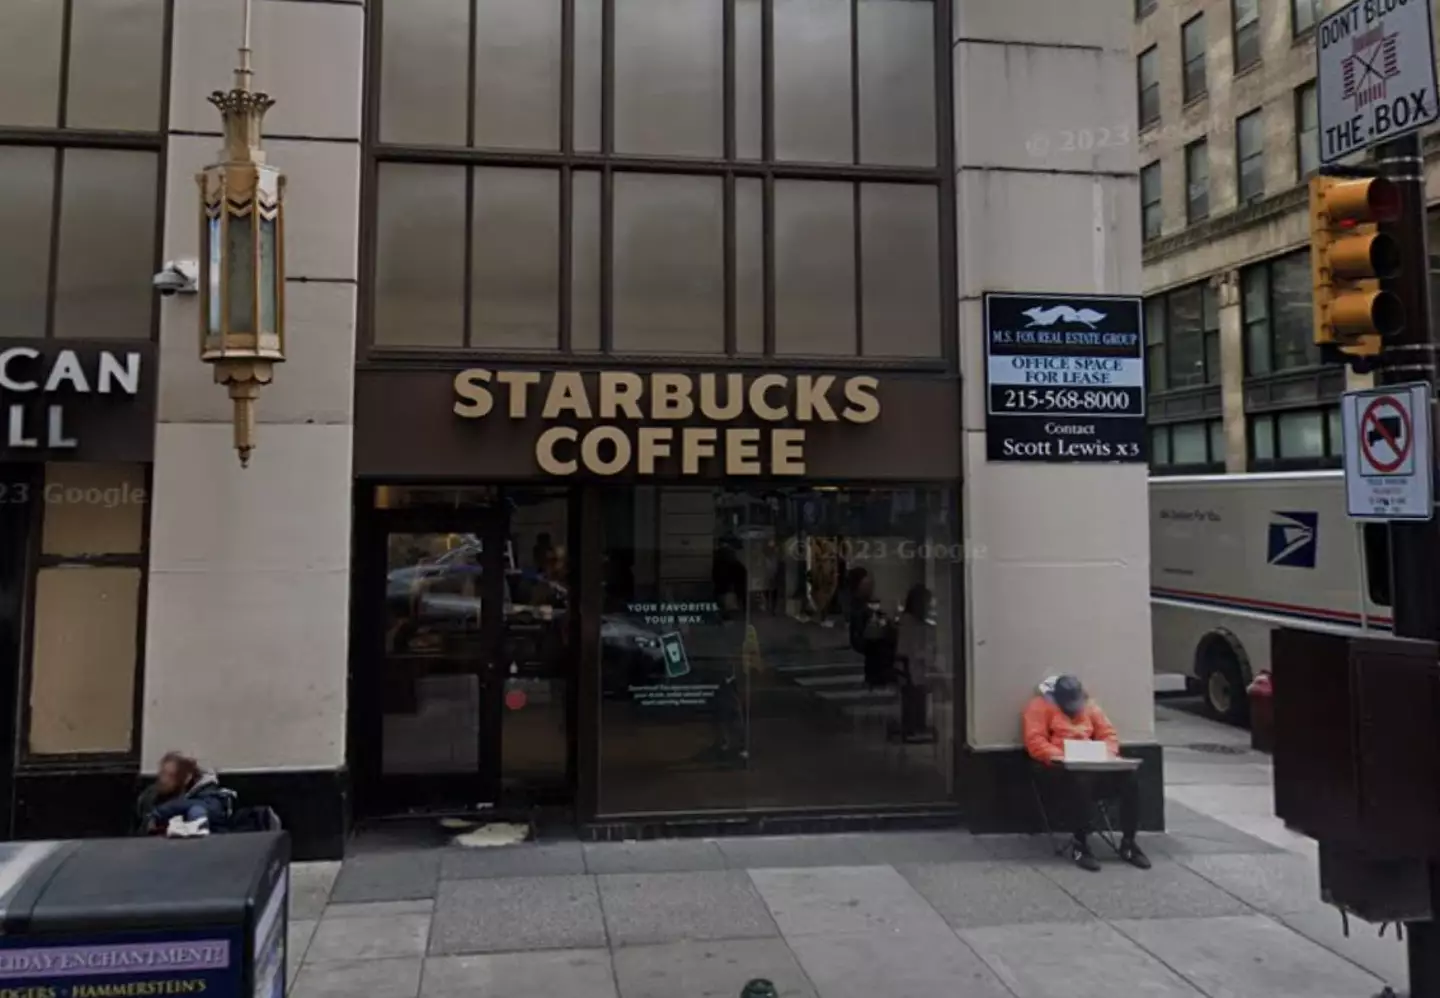 The incident took place at the Starbucks located in Rittenhouse Square.